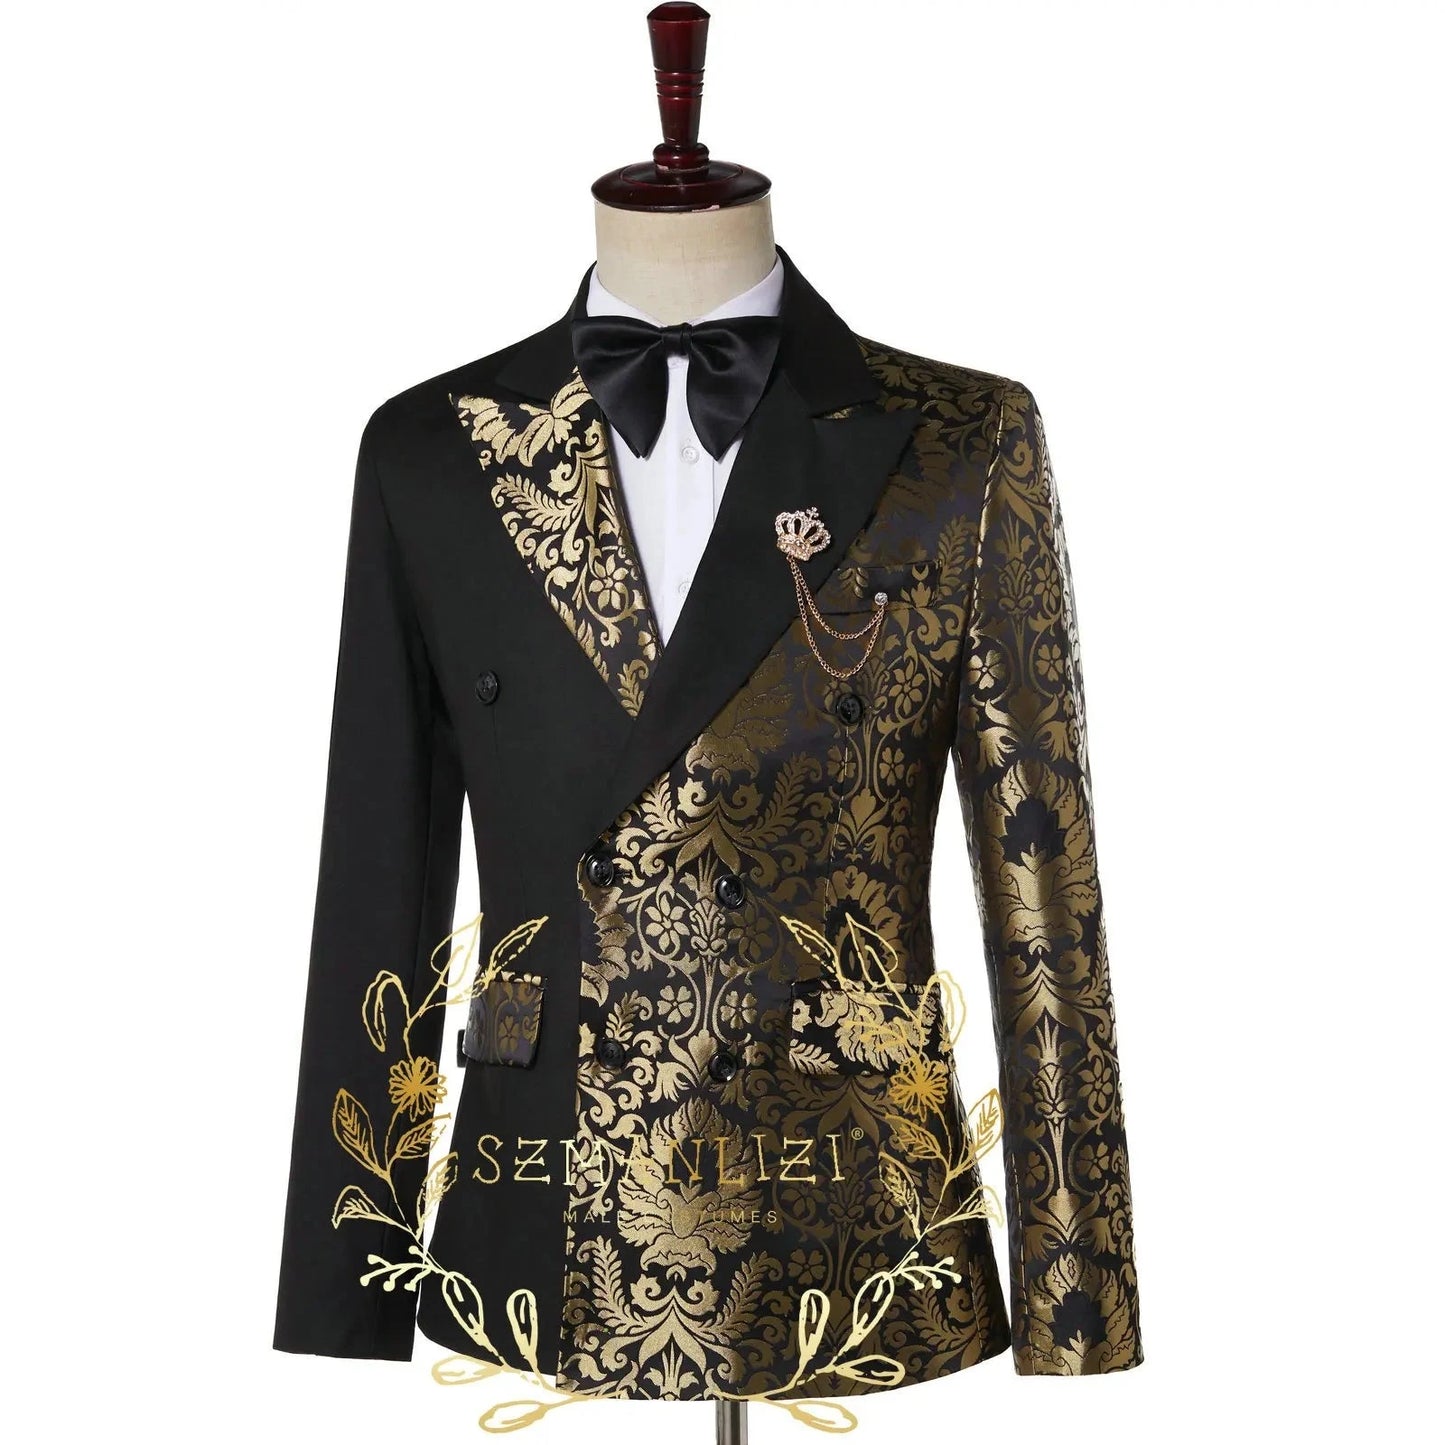 Men's Double Breasted Black Gold Jacquard Wedding Suits